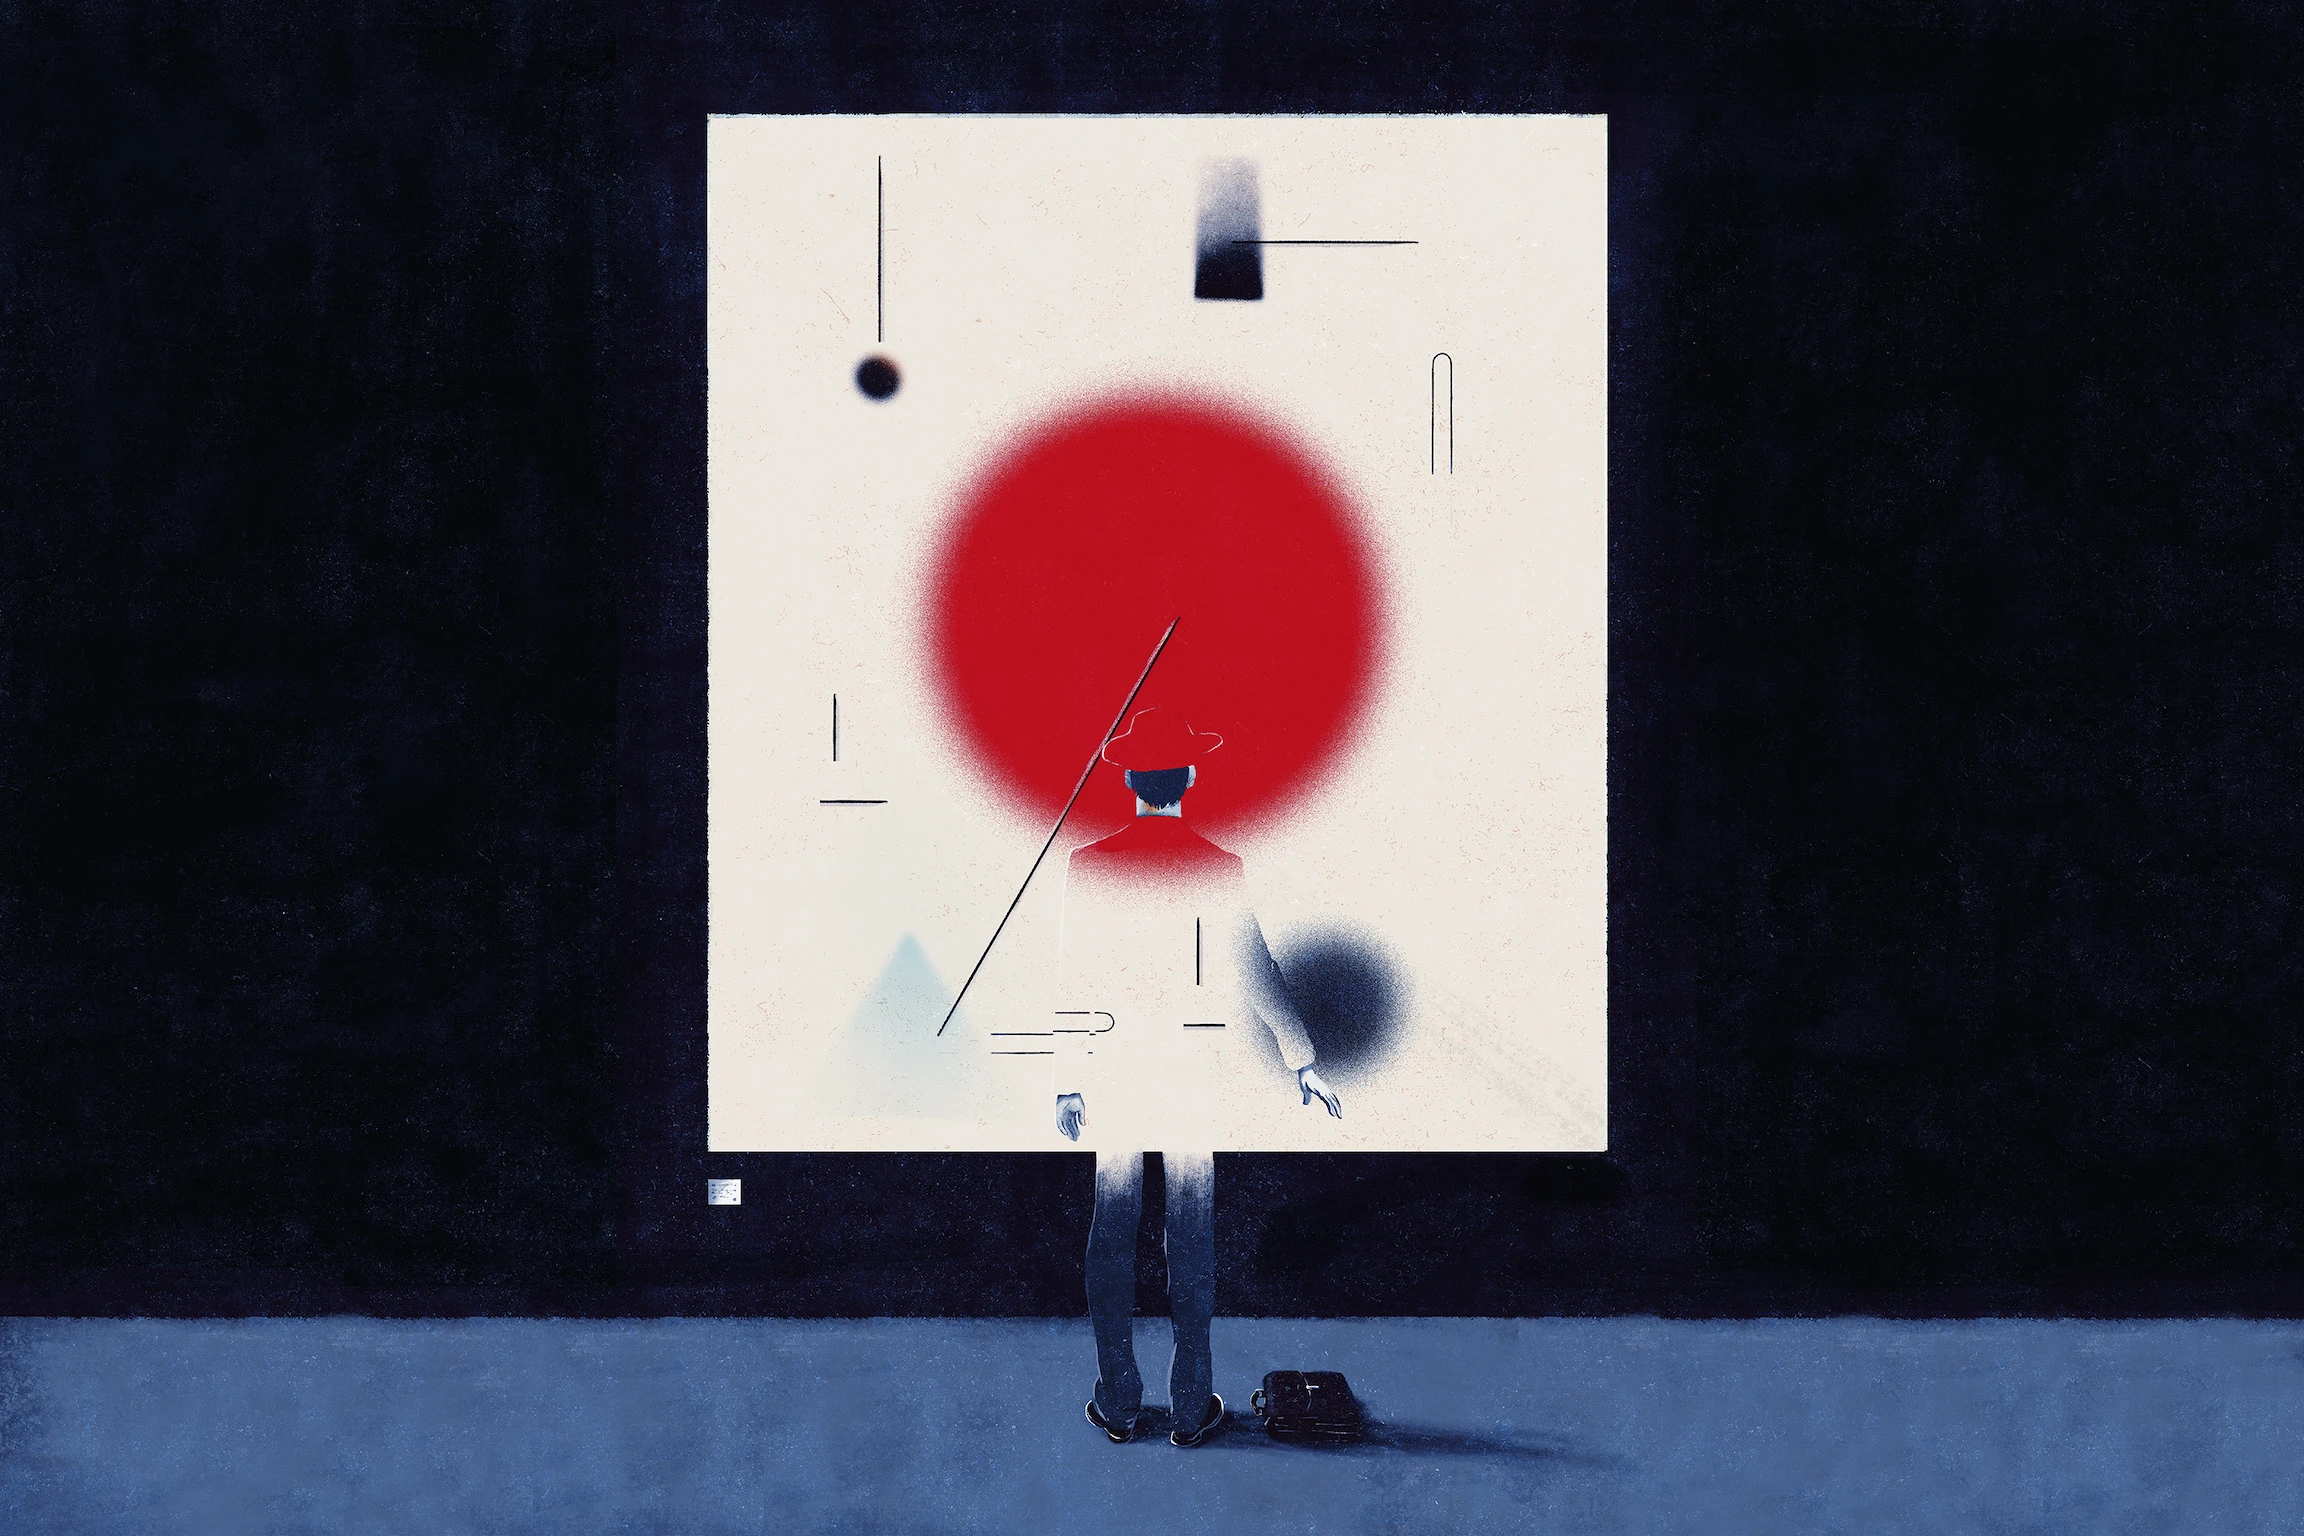 In an abstract illustration, a figure stands before a large canvas with a circle. The illustration evokes a person standing in a gallery or other space and viewing a work of art before them.